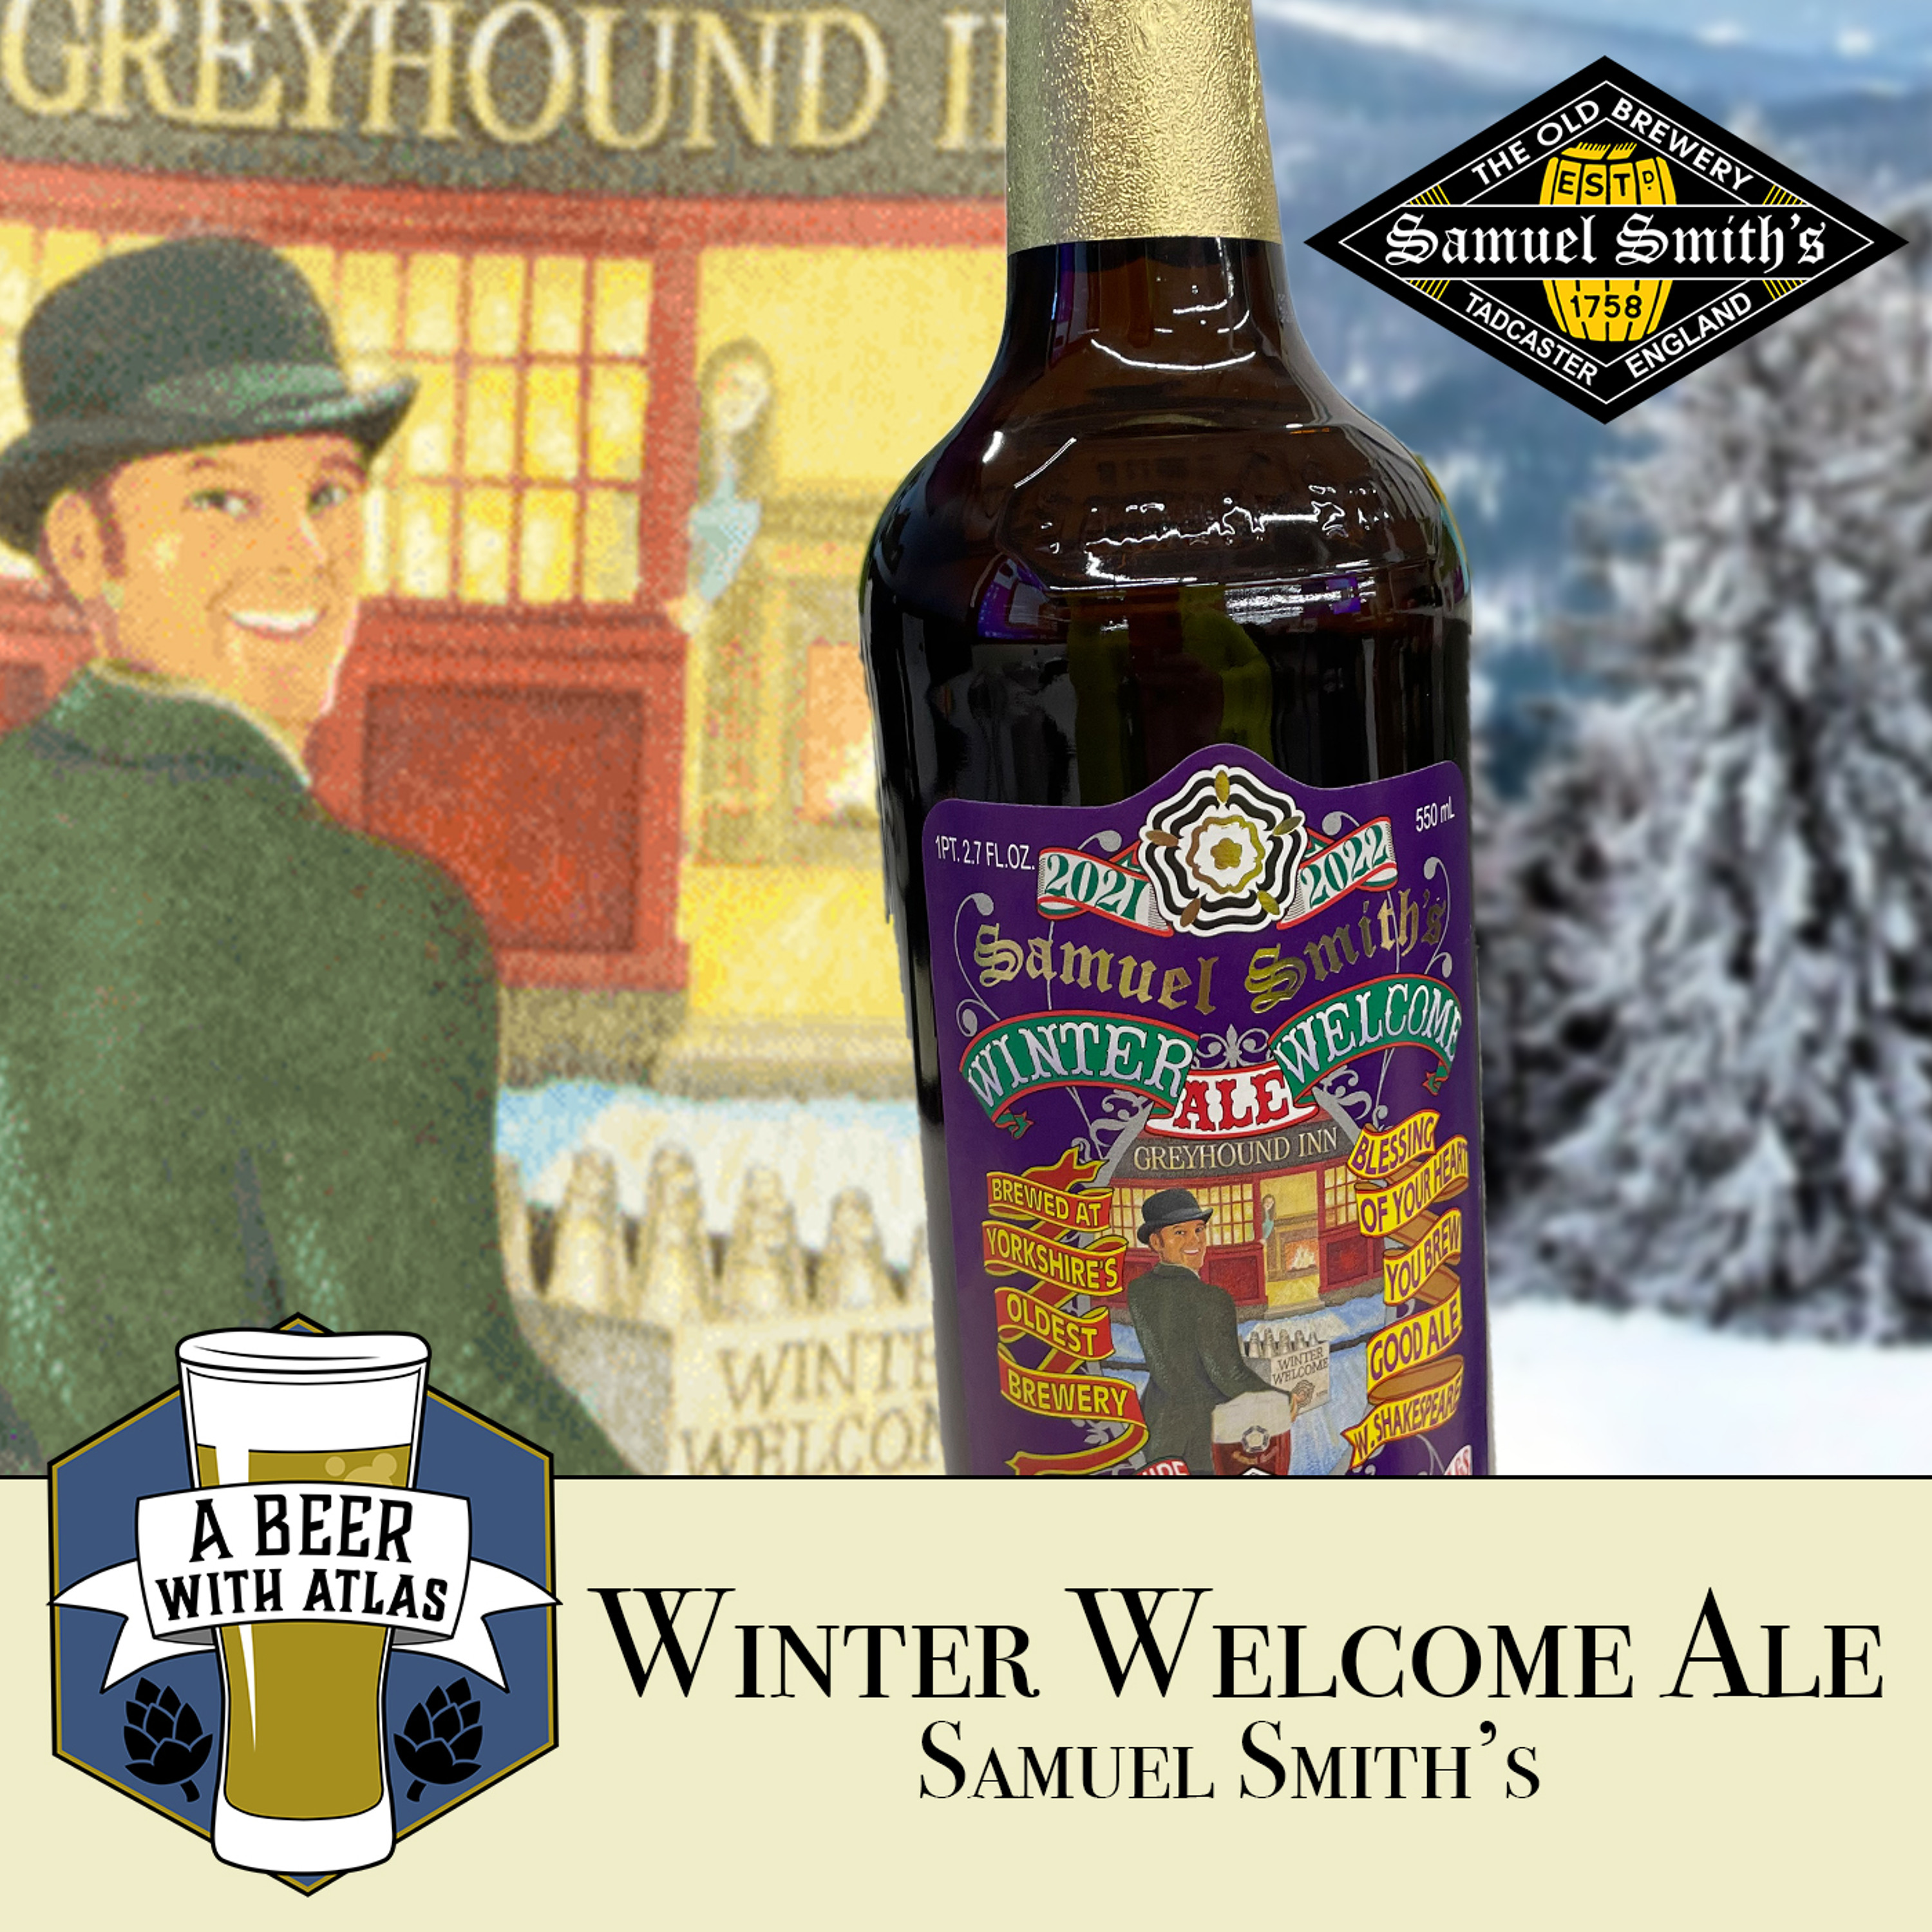 Samuel Smith's Winter Welcome Ale - A Beer with Atlas 174